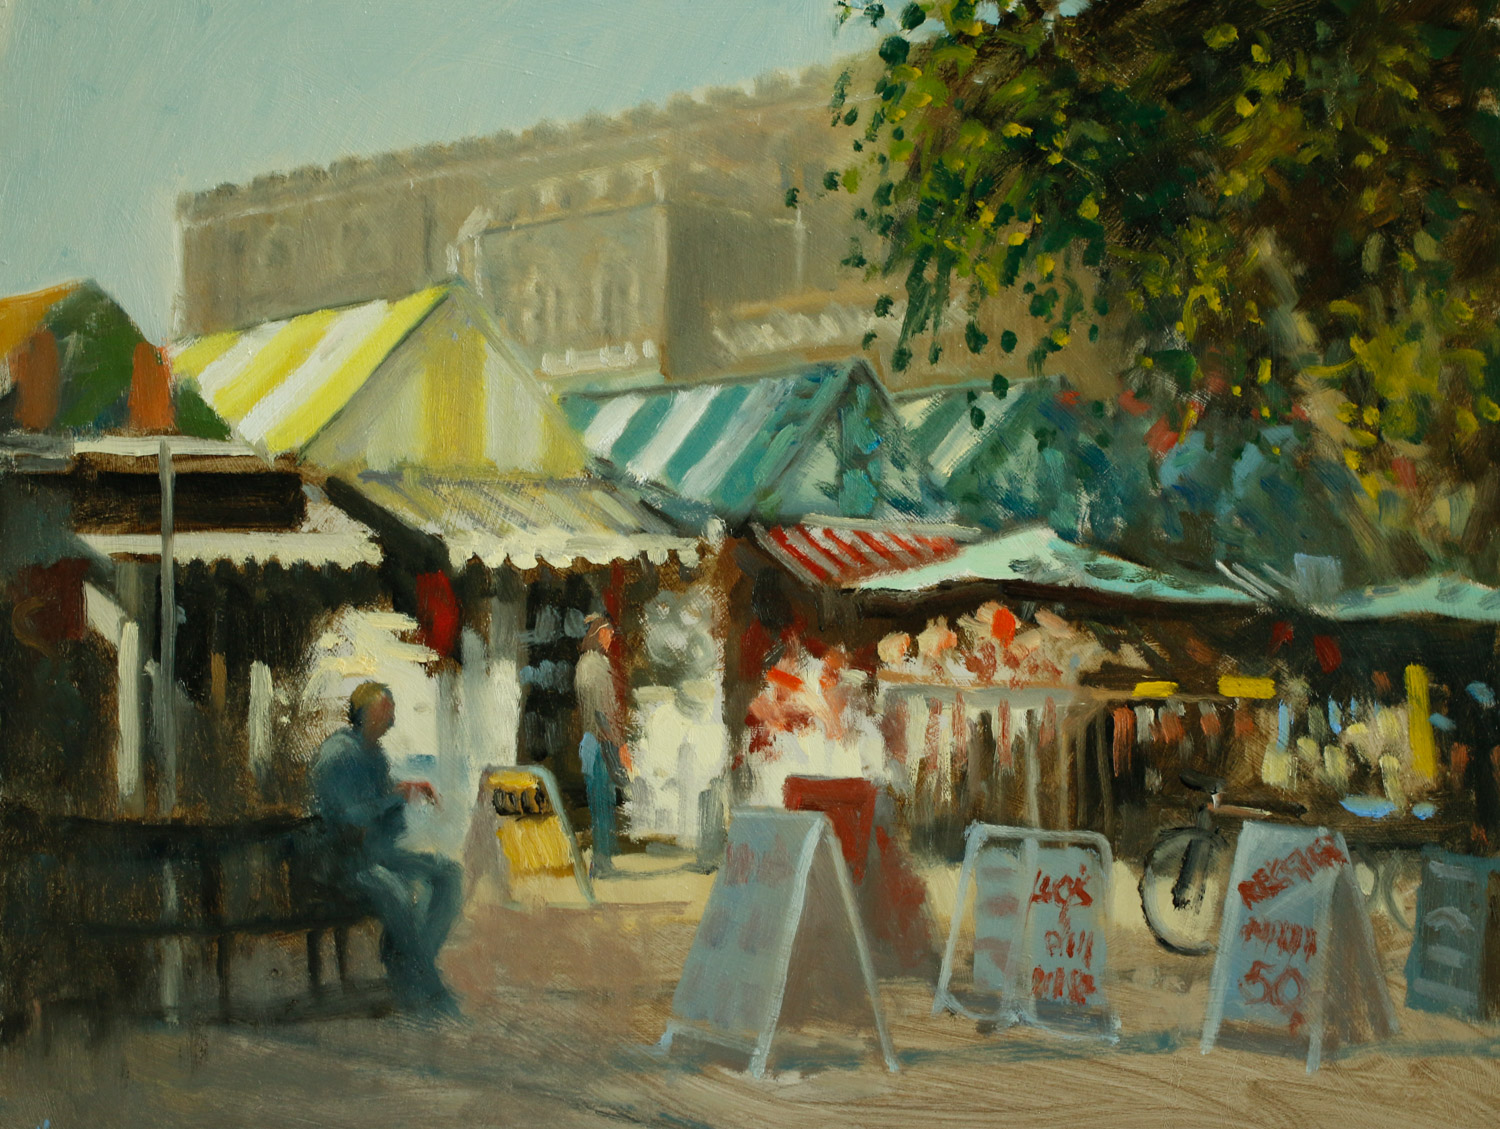 Artist Michael Richardson - Early Light Norwich Market 16x20 Oil on Board at Paint Out Norwich 2015